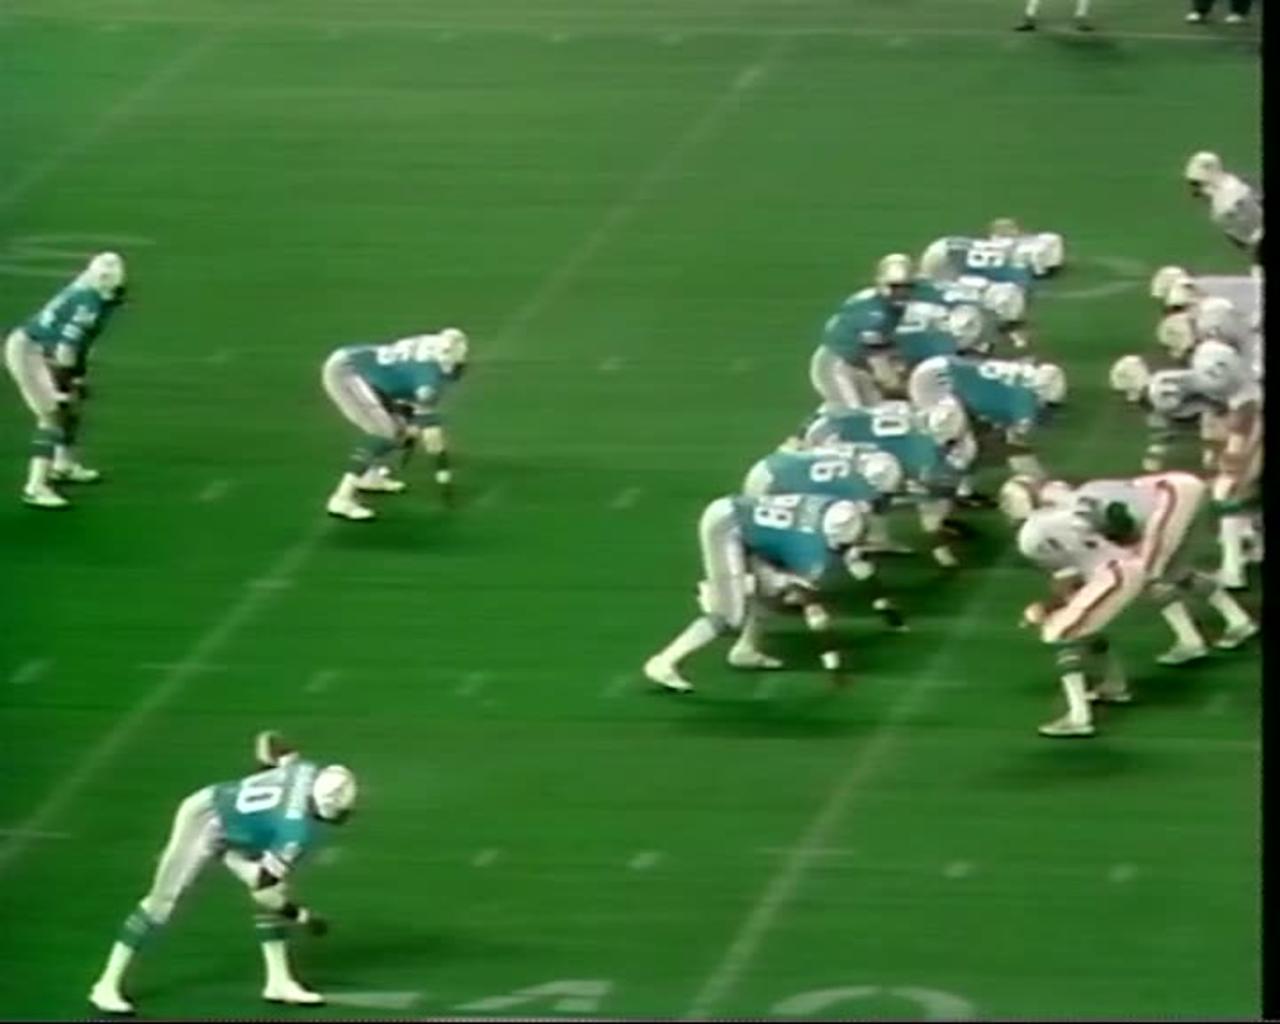 November 20, 1987 - The Best-Ever Monday Night Football Game??